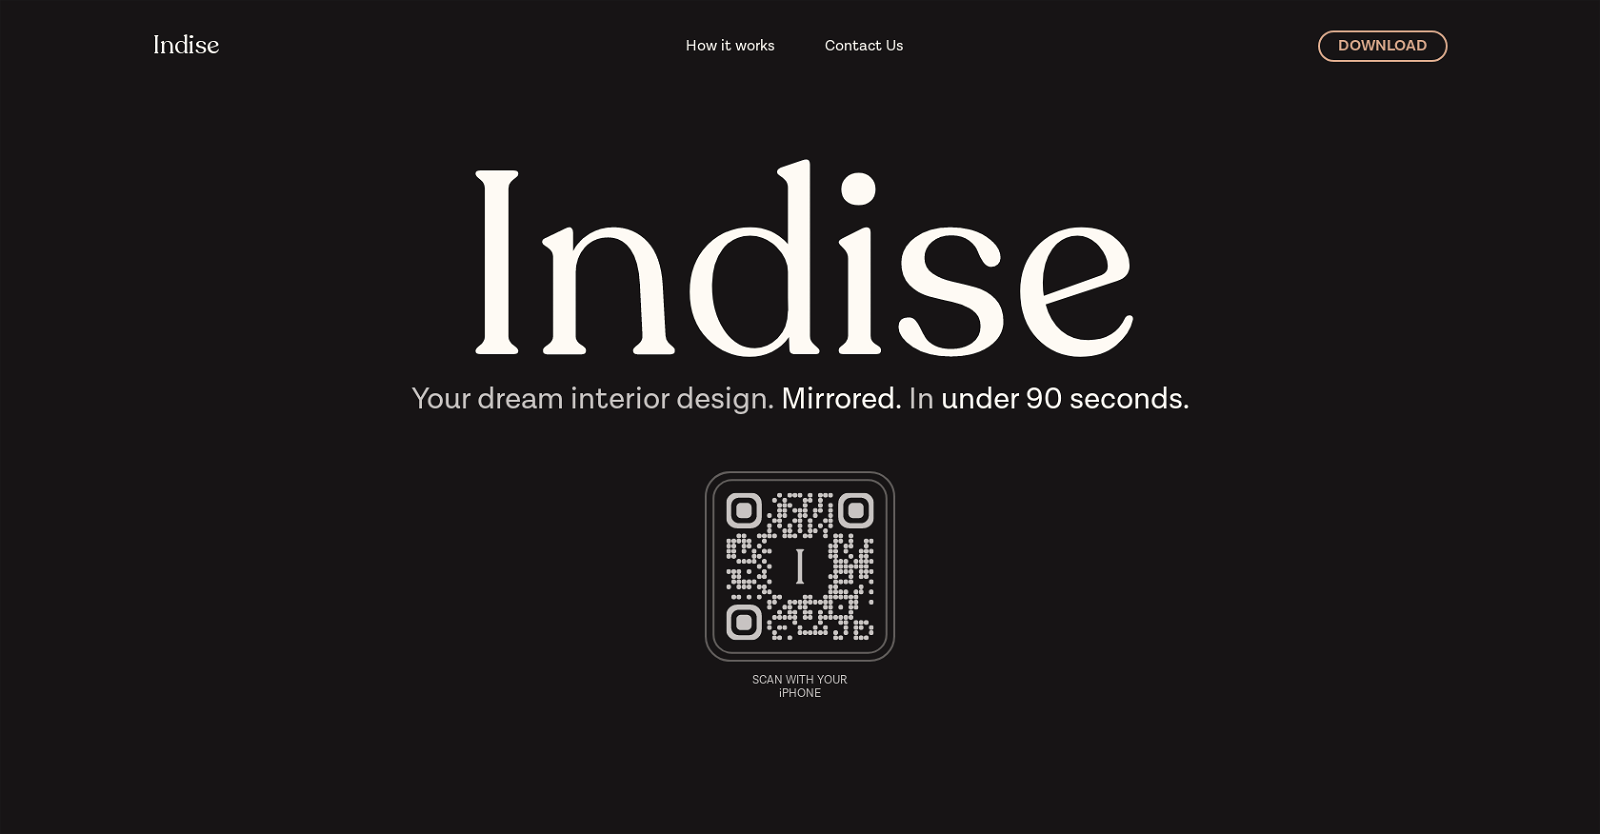 Indise website